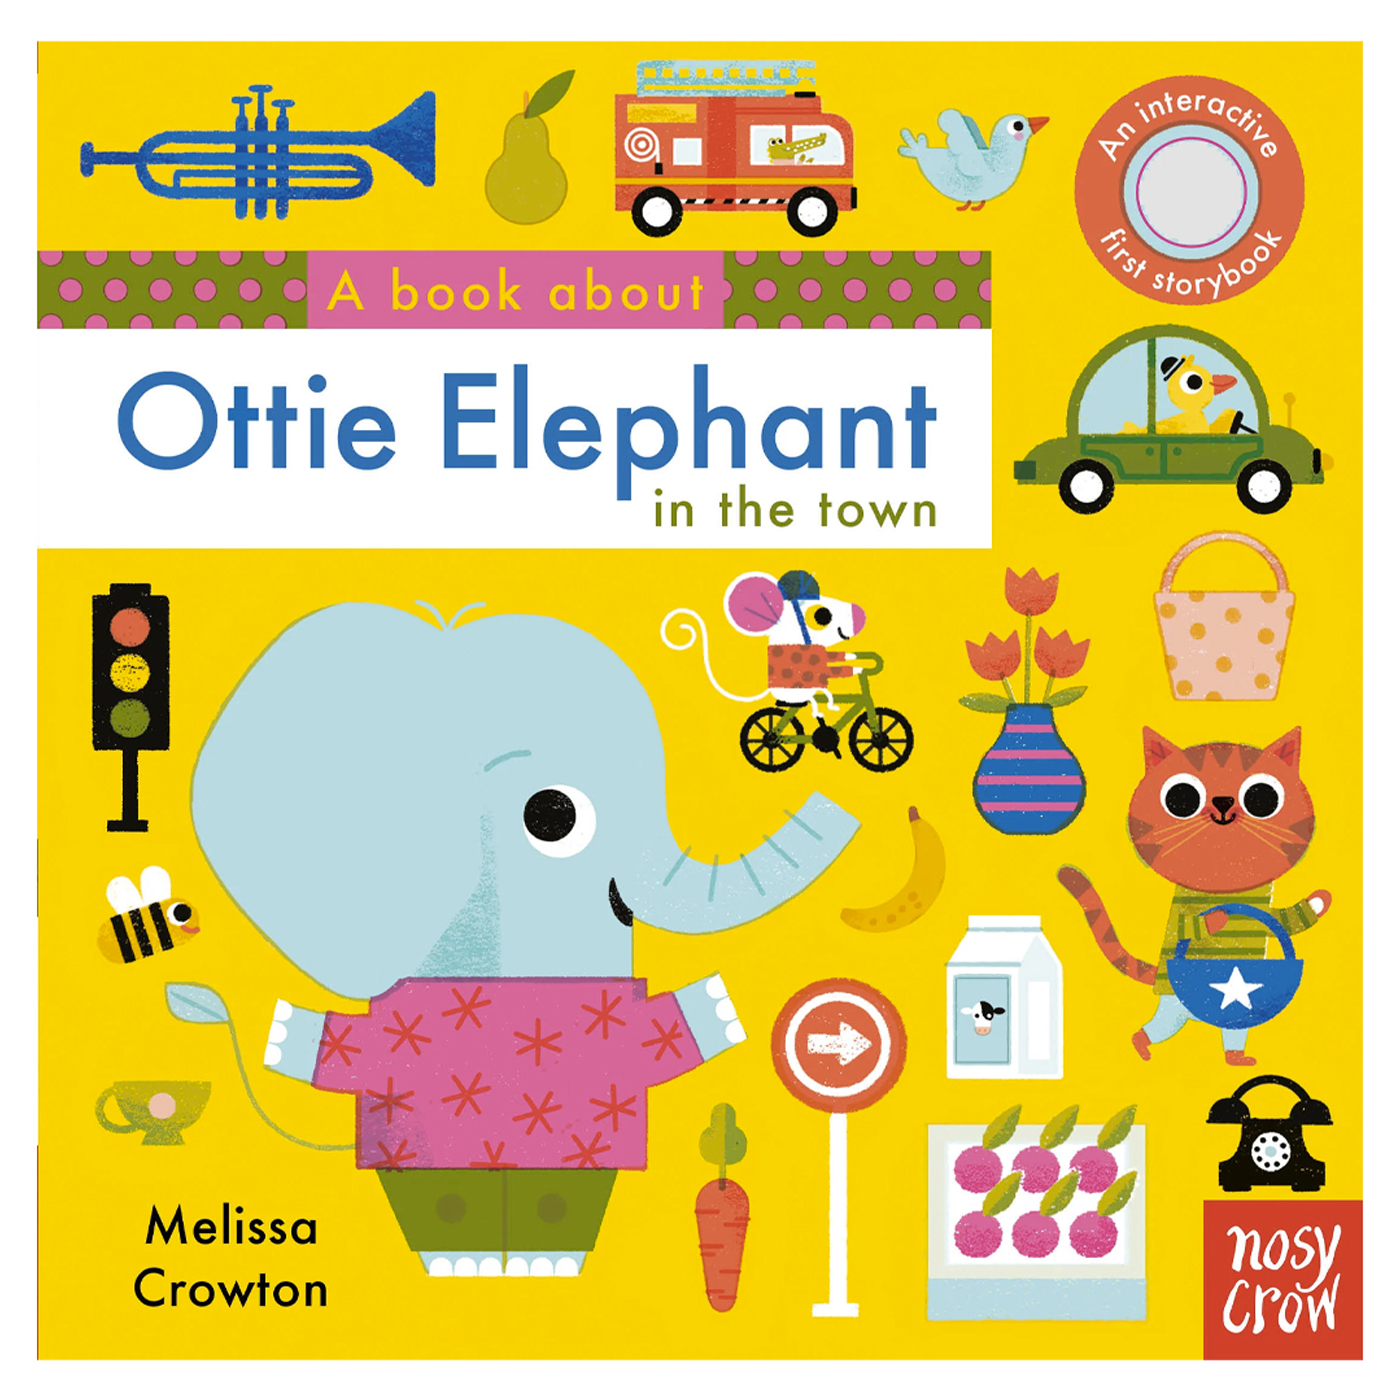 NOSY CROW A book about Ottie Elephant in the town